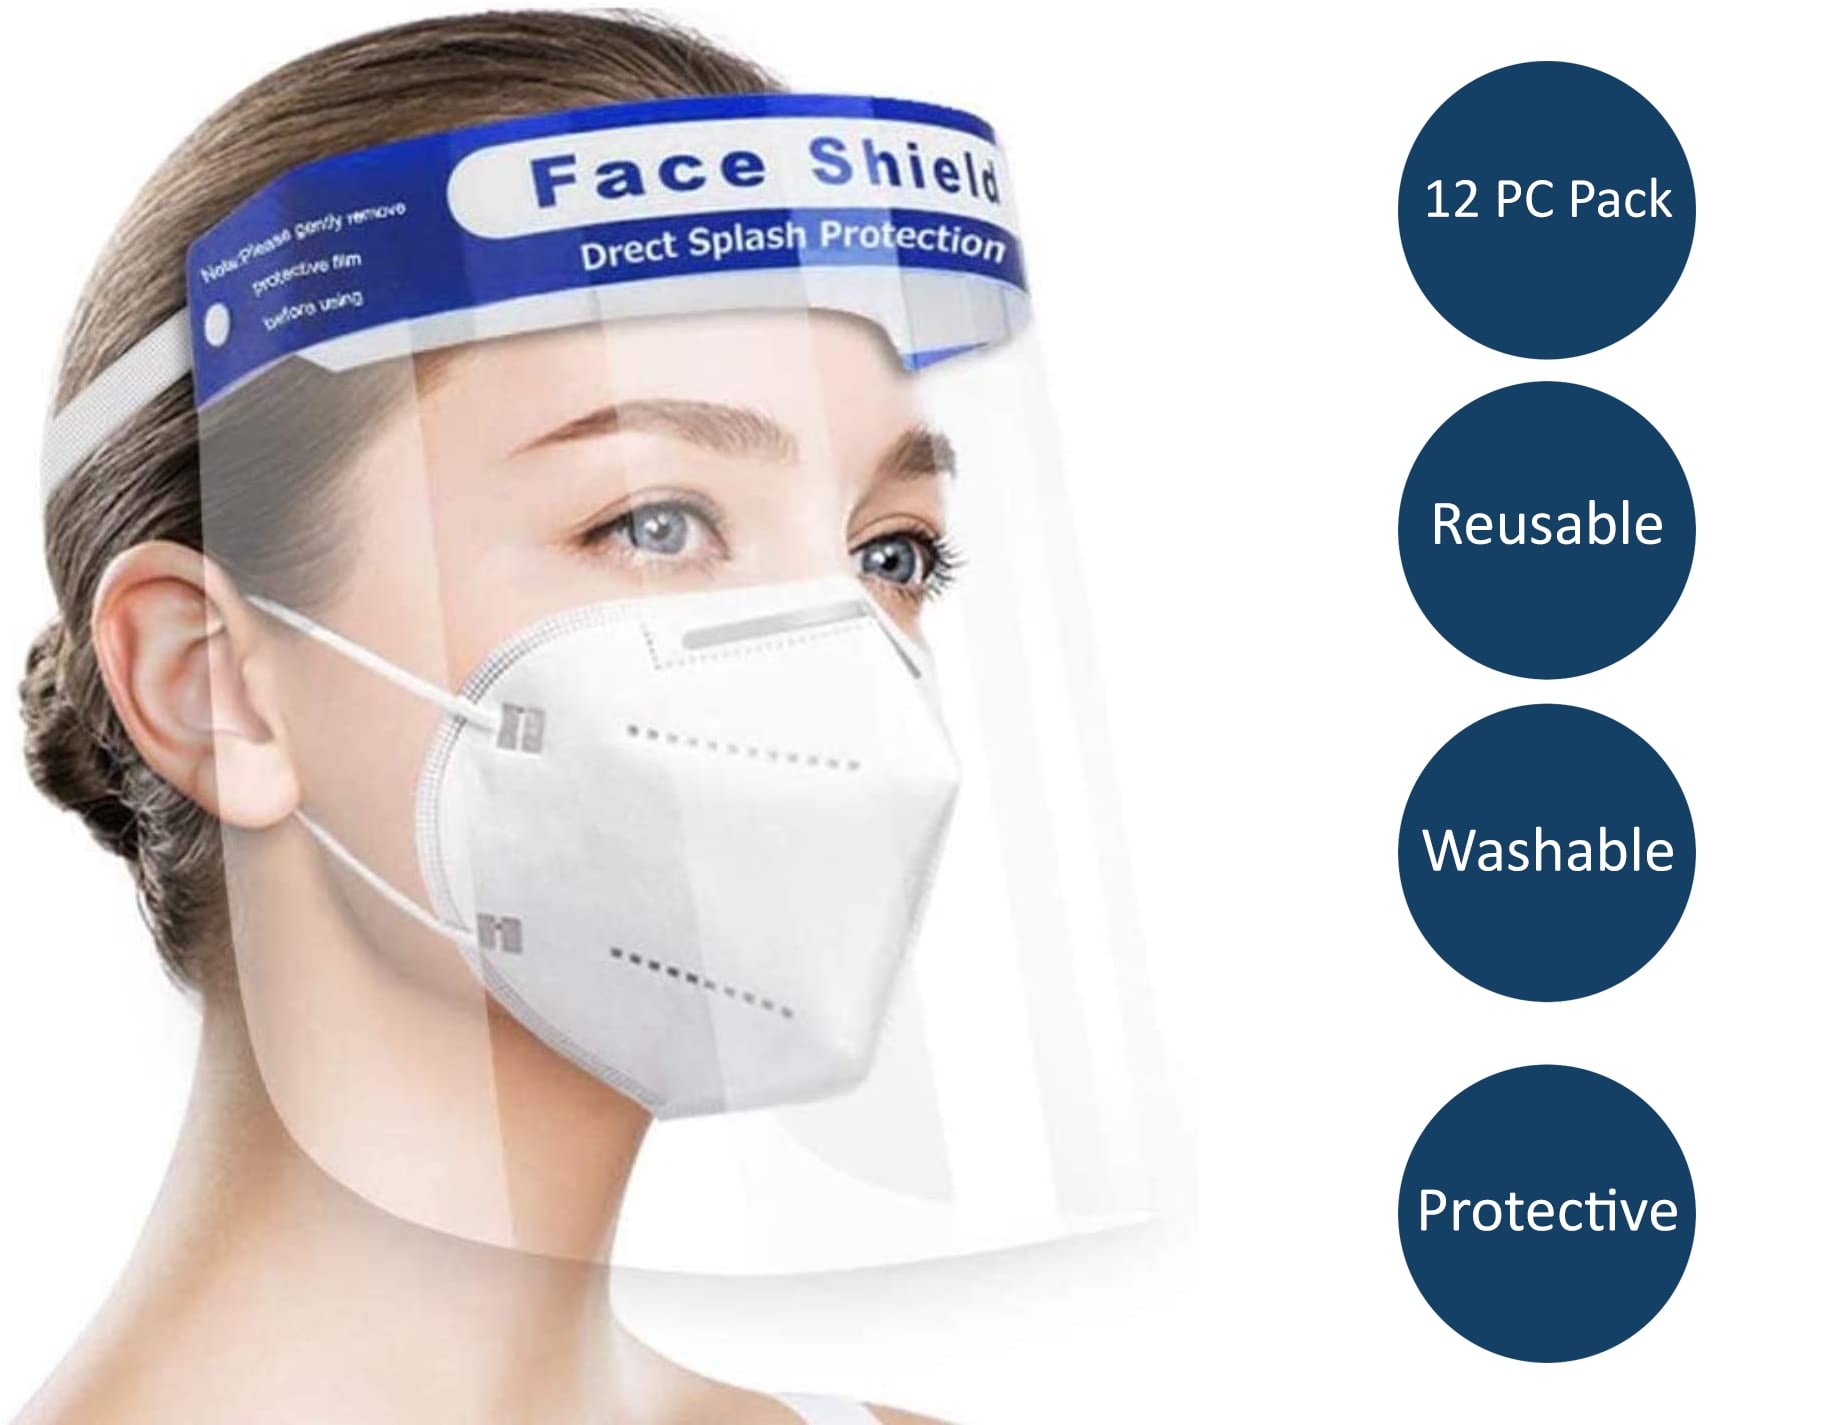 24 PCS Bulk Deal Safety Face Shield Reusable Washable with 12 Glasses Protection